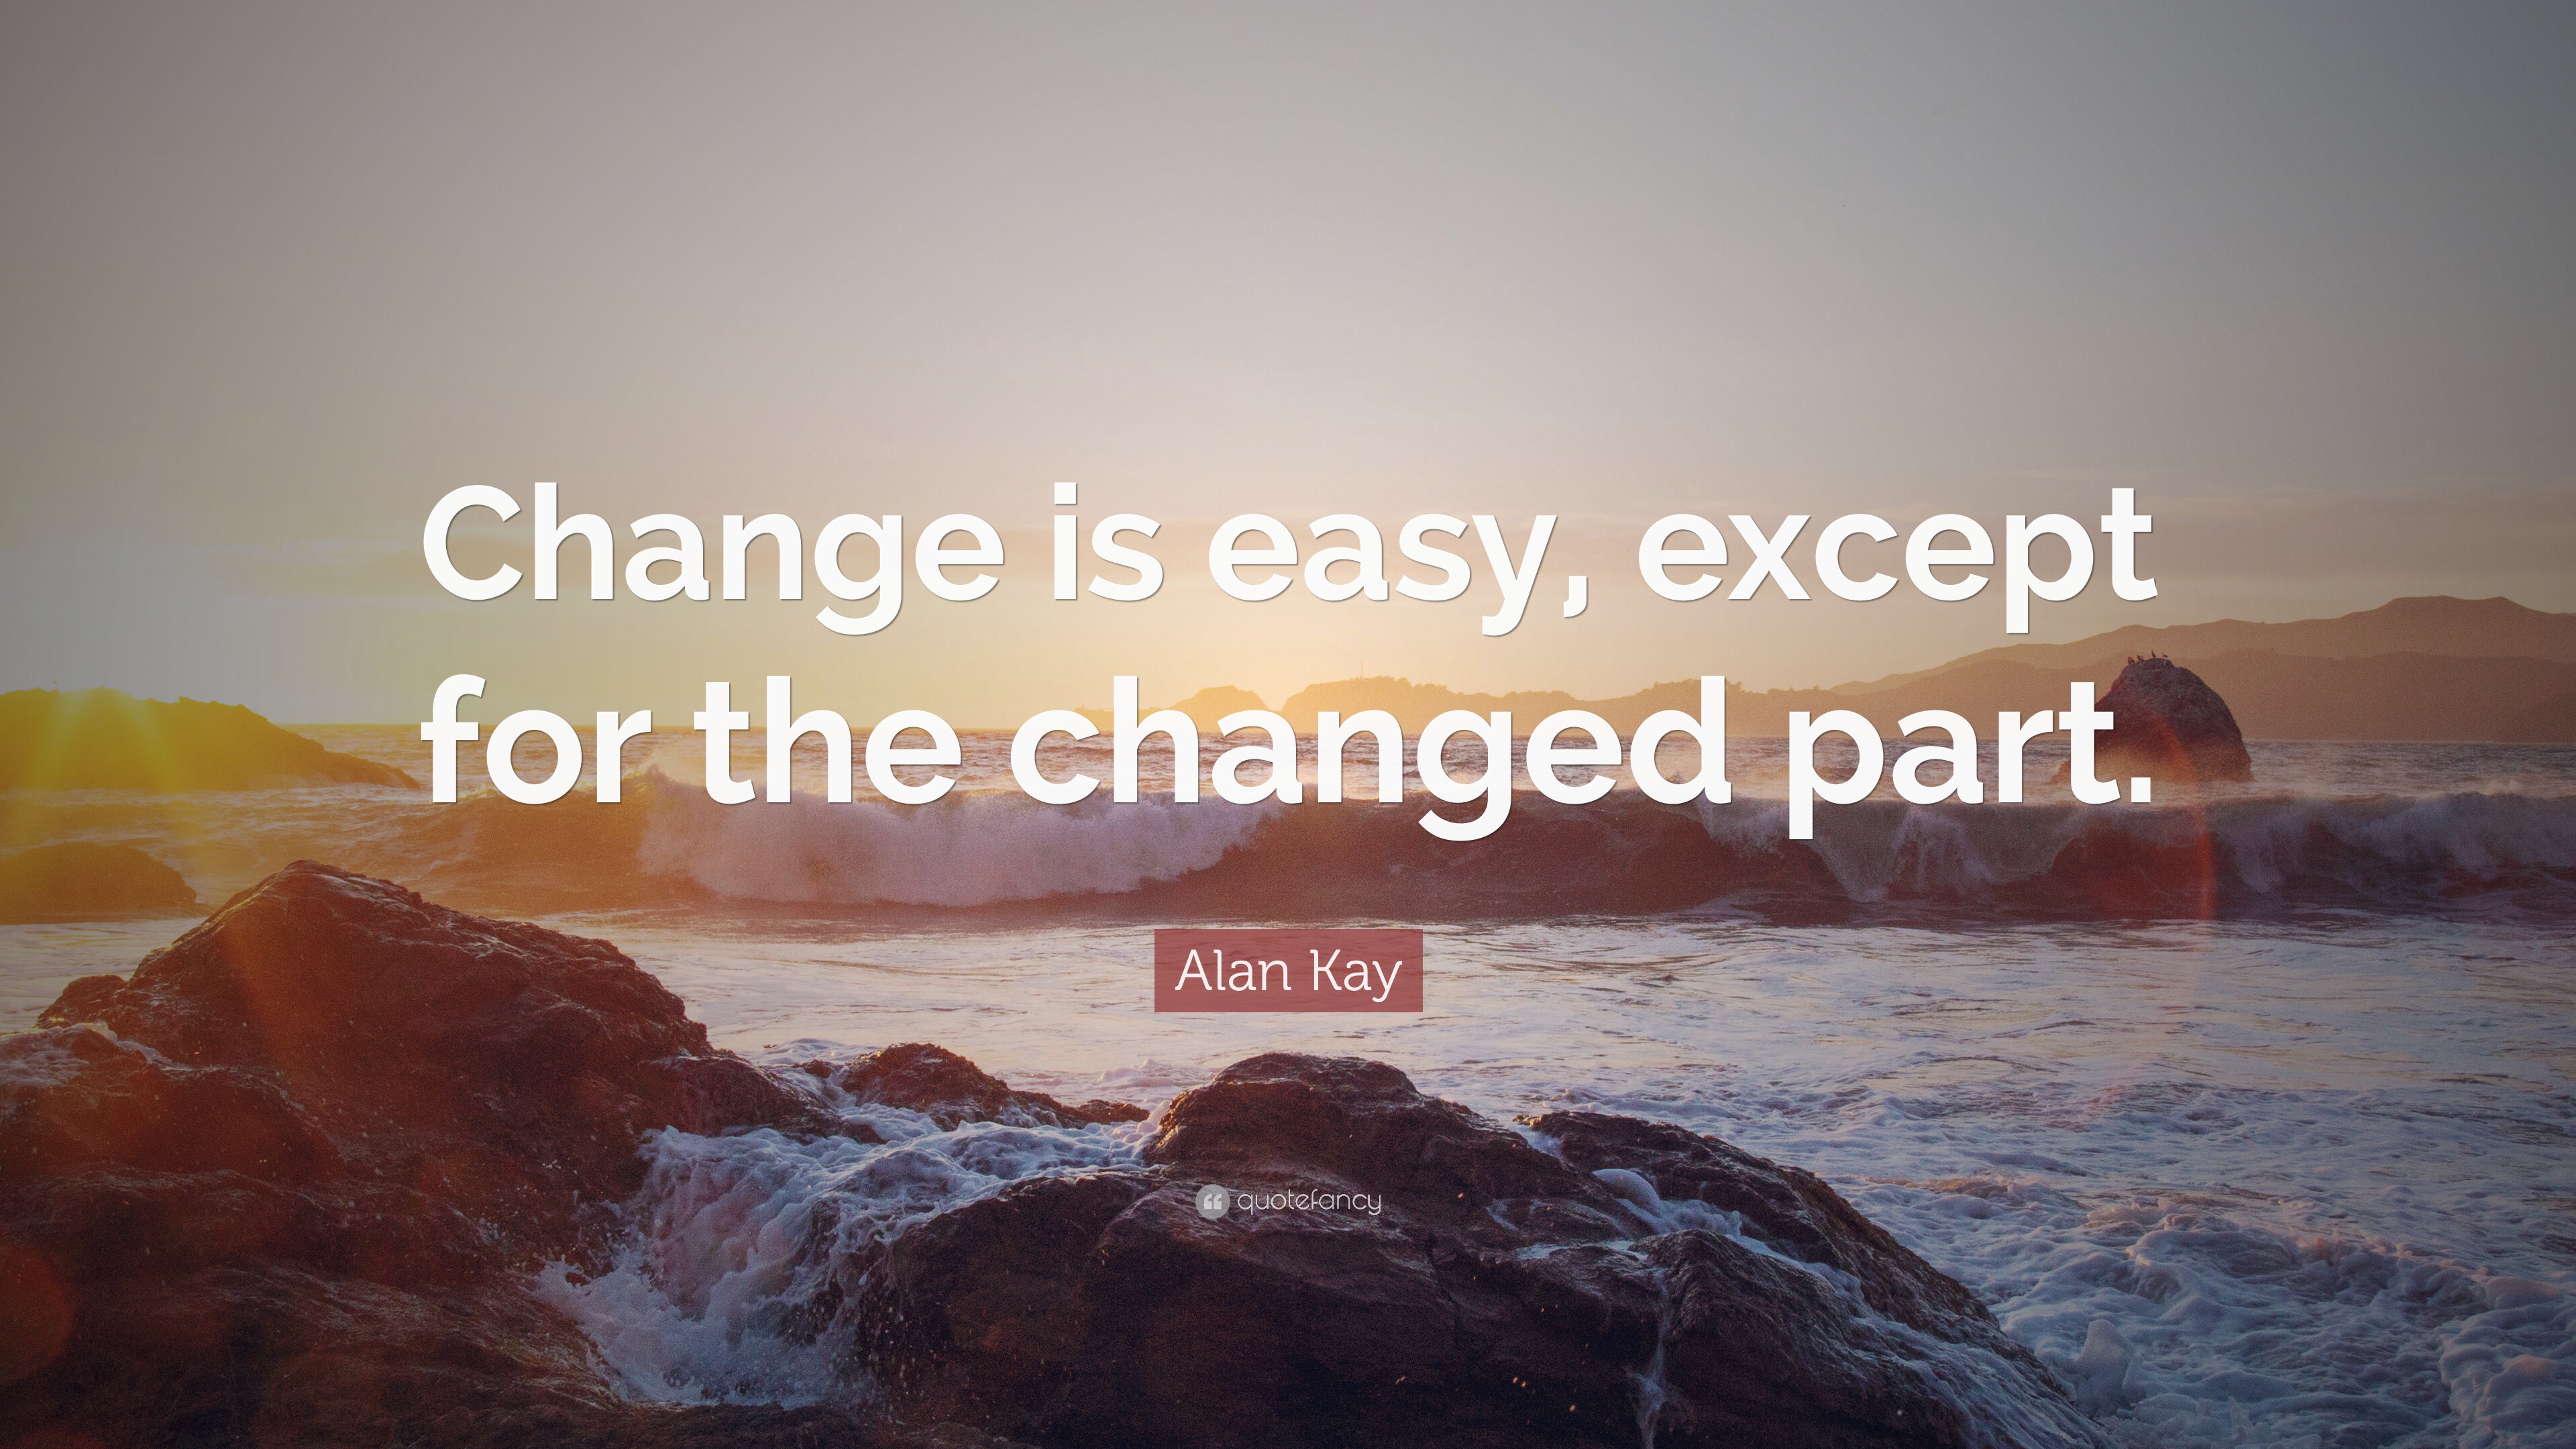 Alan Kay Quote: “Change is easy, except for the changed part.”